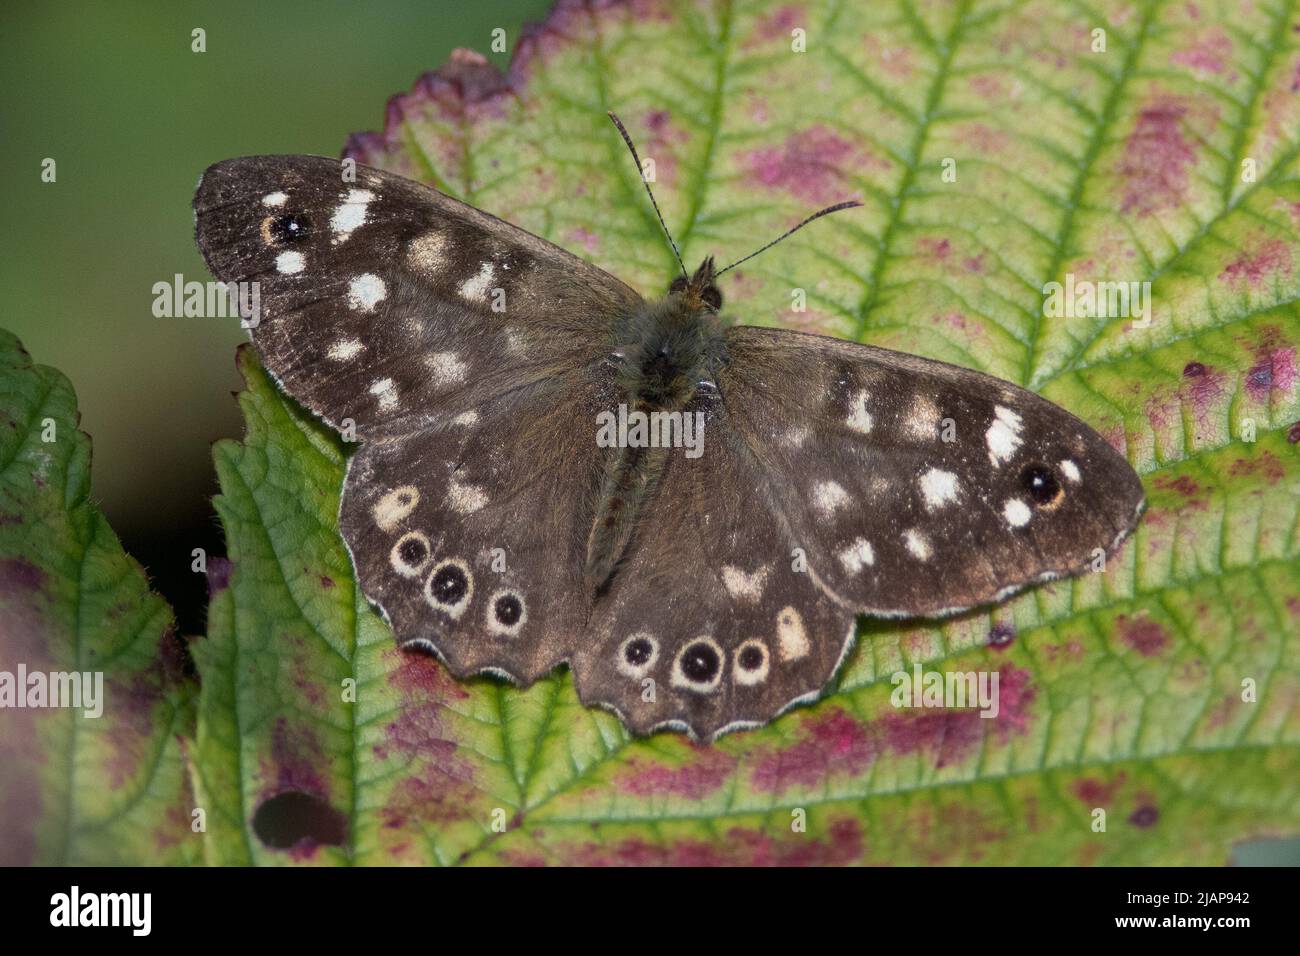 A speckled wood butterfly (Pararge aegeria) at rest on a leaf. Taken at Hawthorn, near Seaham, UK. Stock Photo